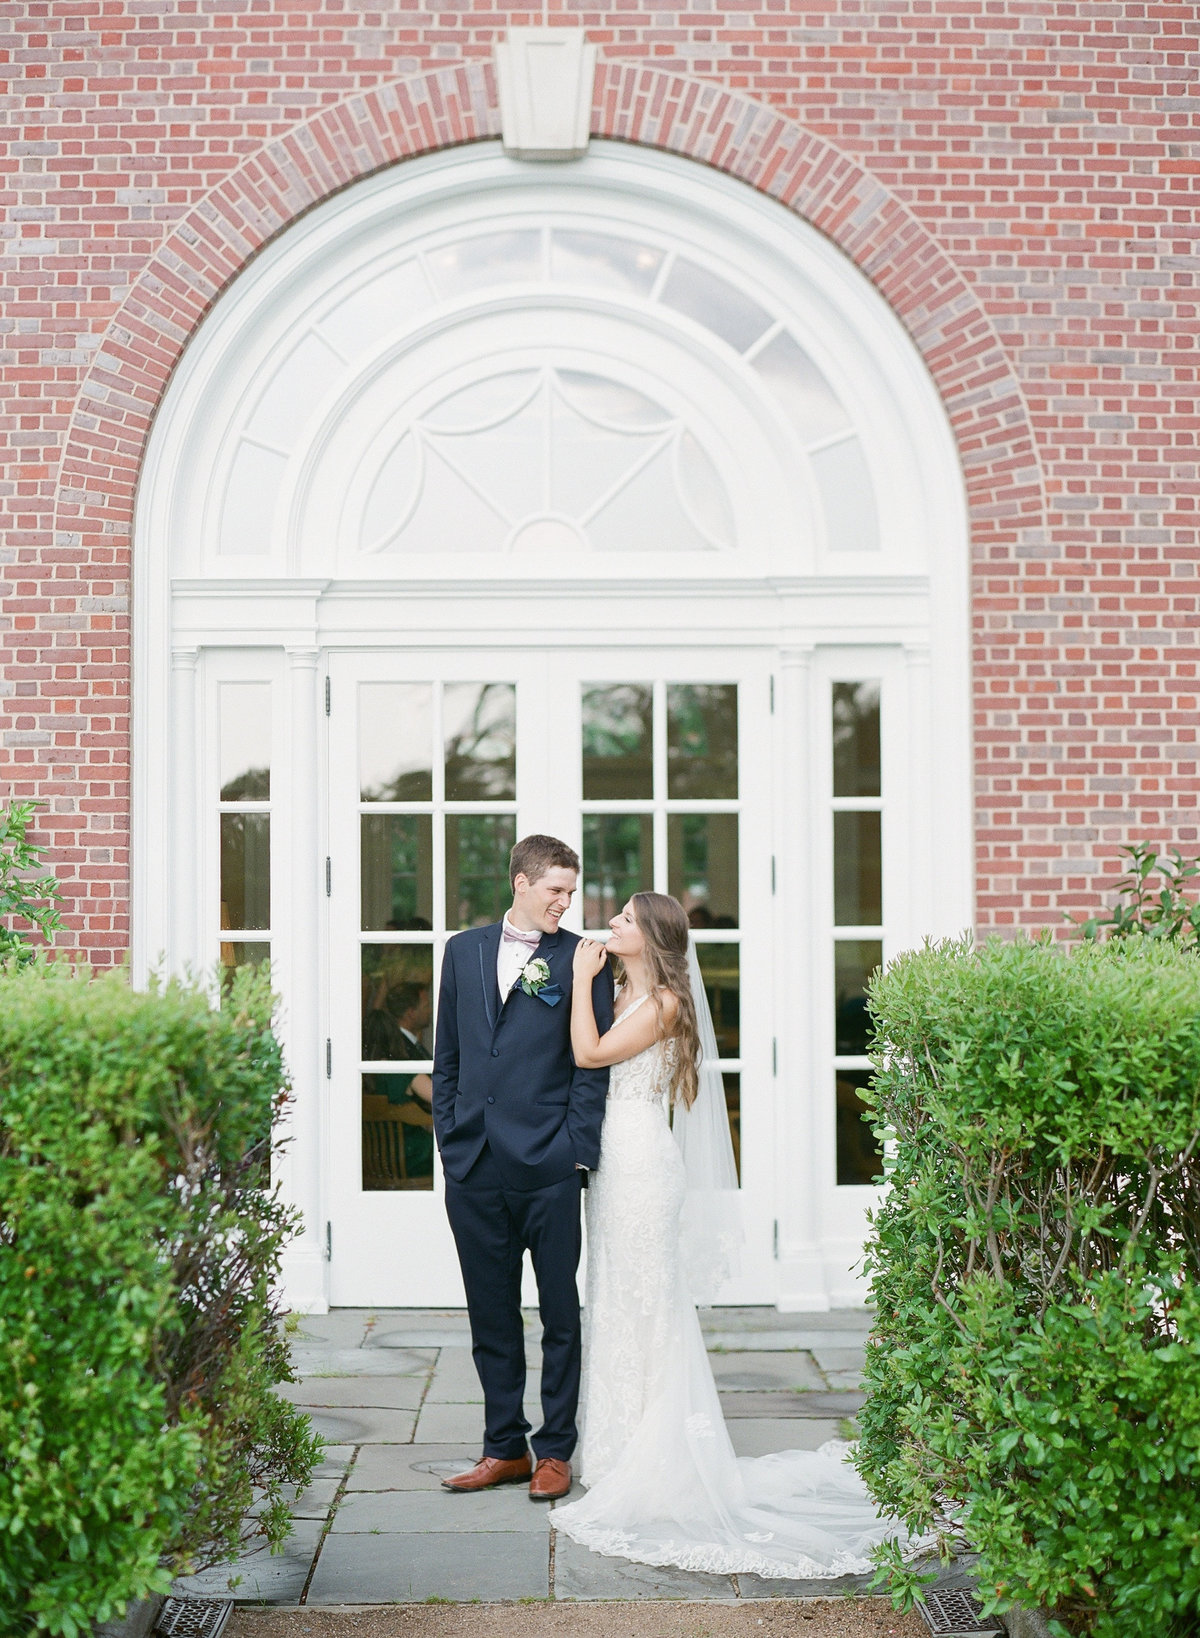 Jacqueline Anne Photography - Chrissy and David-128